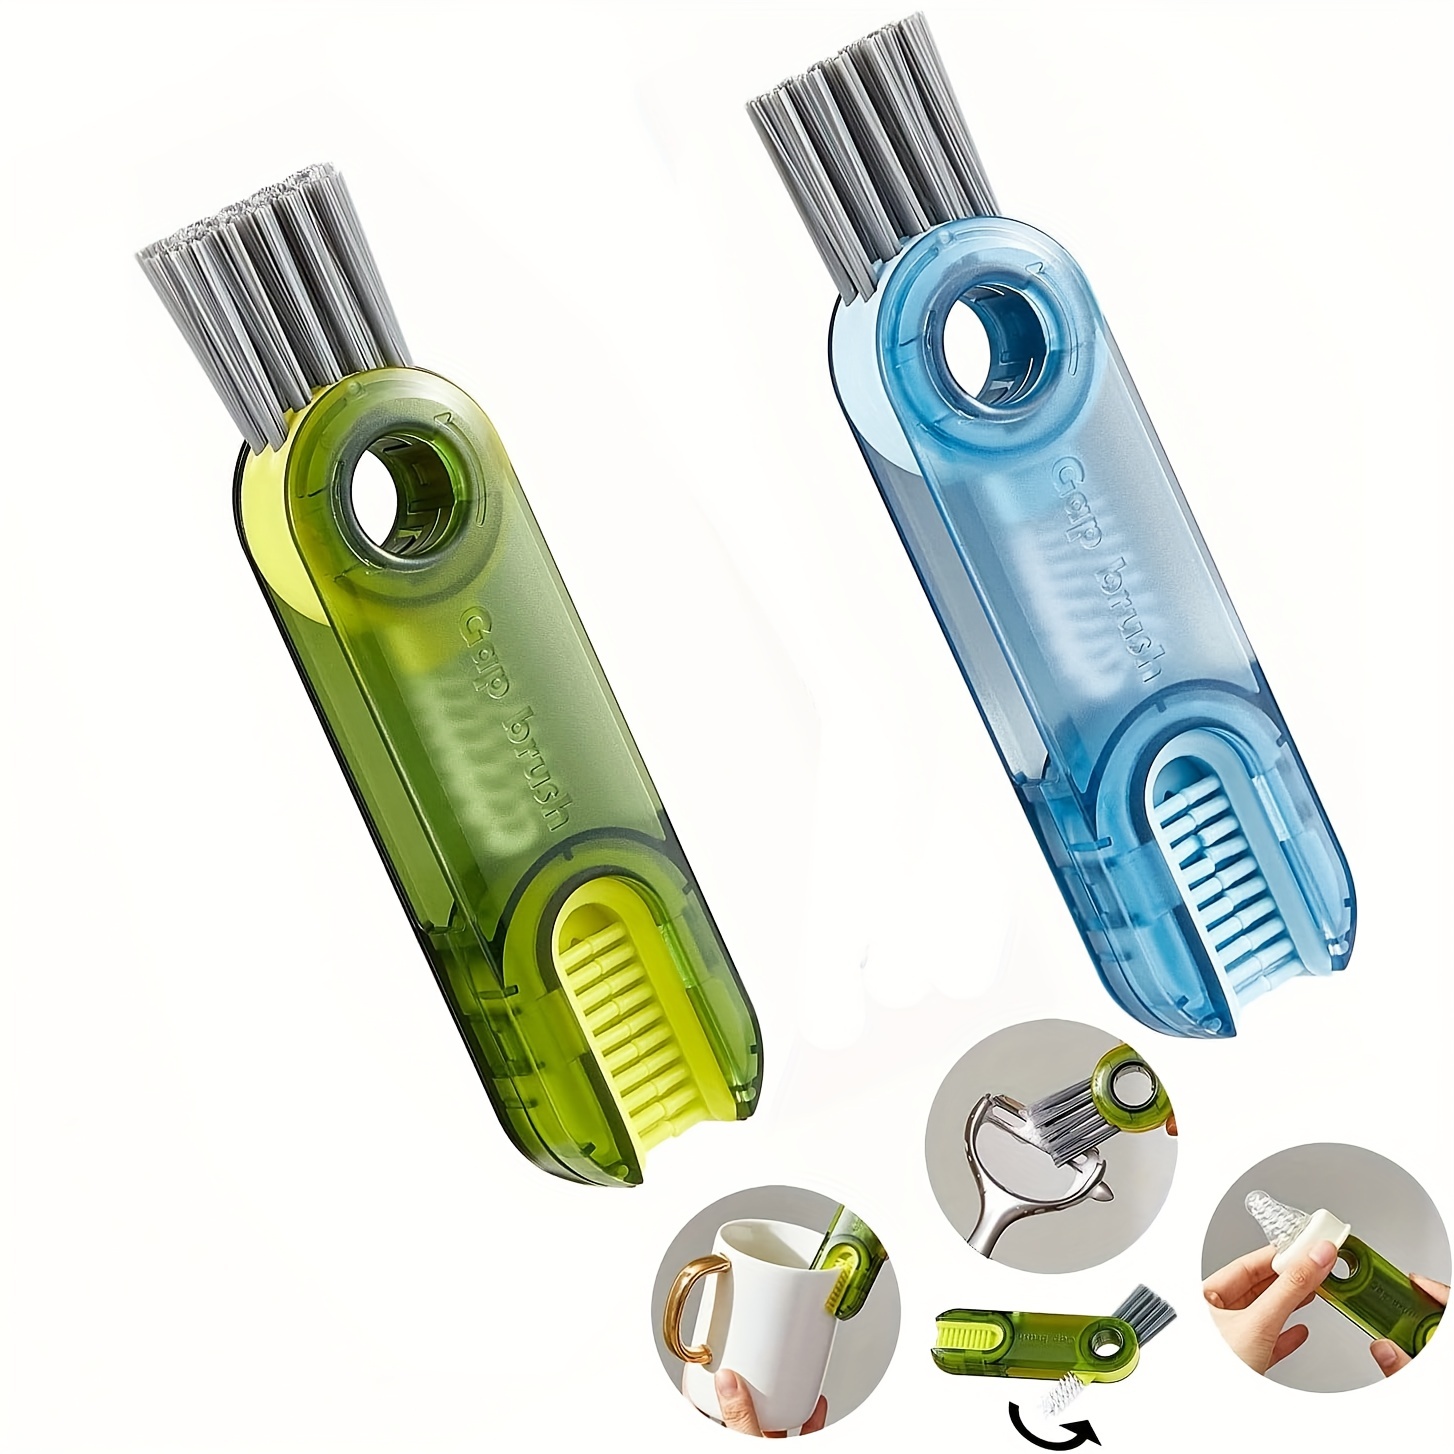 3 in 1 Cup Lid Gap Cleaning Brush Set, Multifunctional Insulation Bottle  Cleaning Tools, Mutipurpose Tiny Silicone Cup Holder Cleaner, Home Kitchen